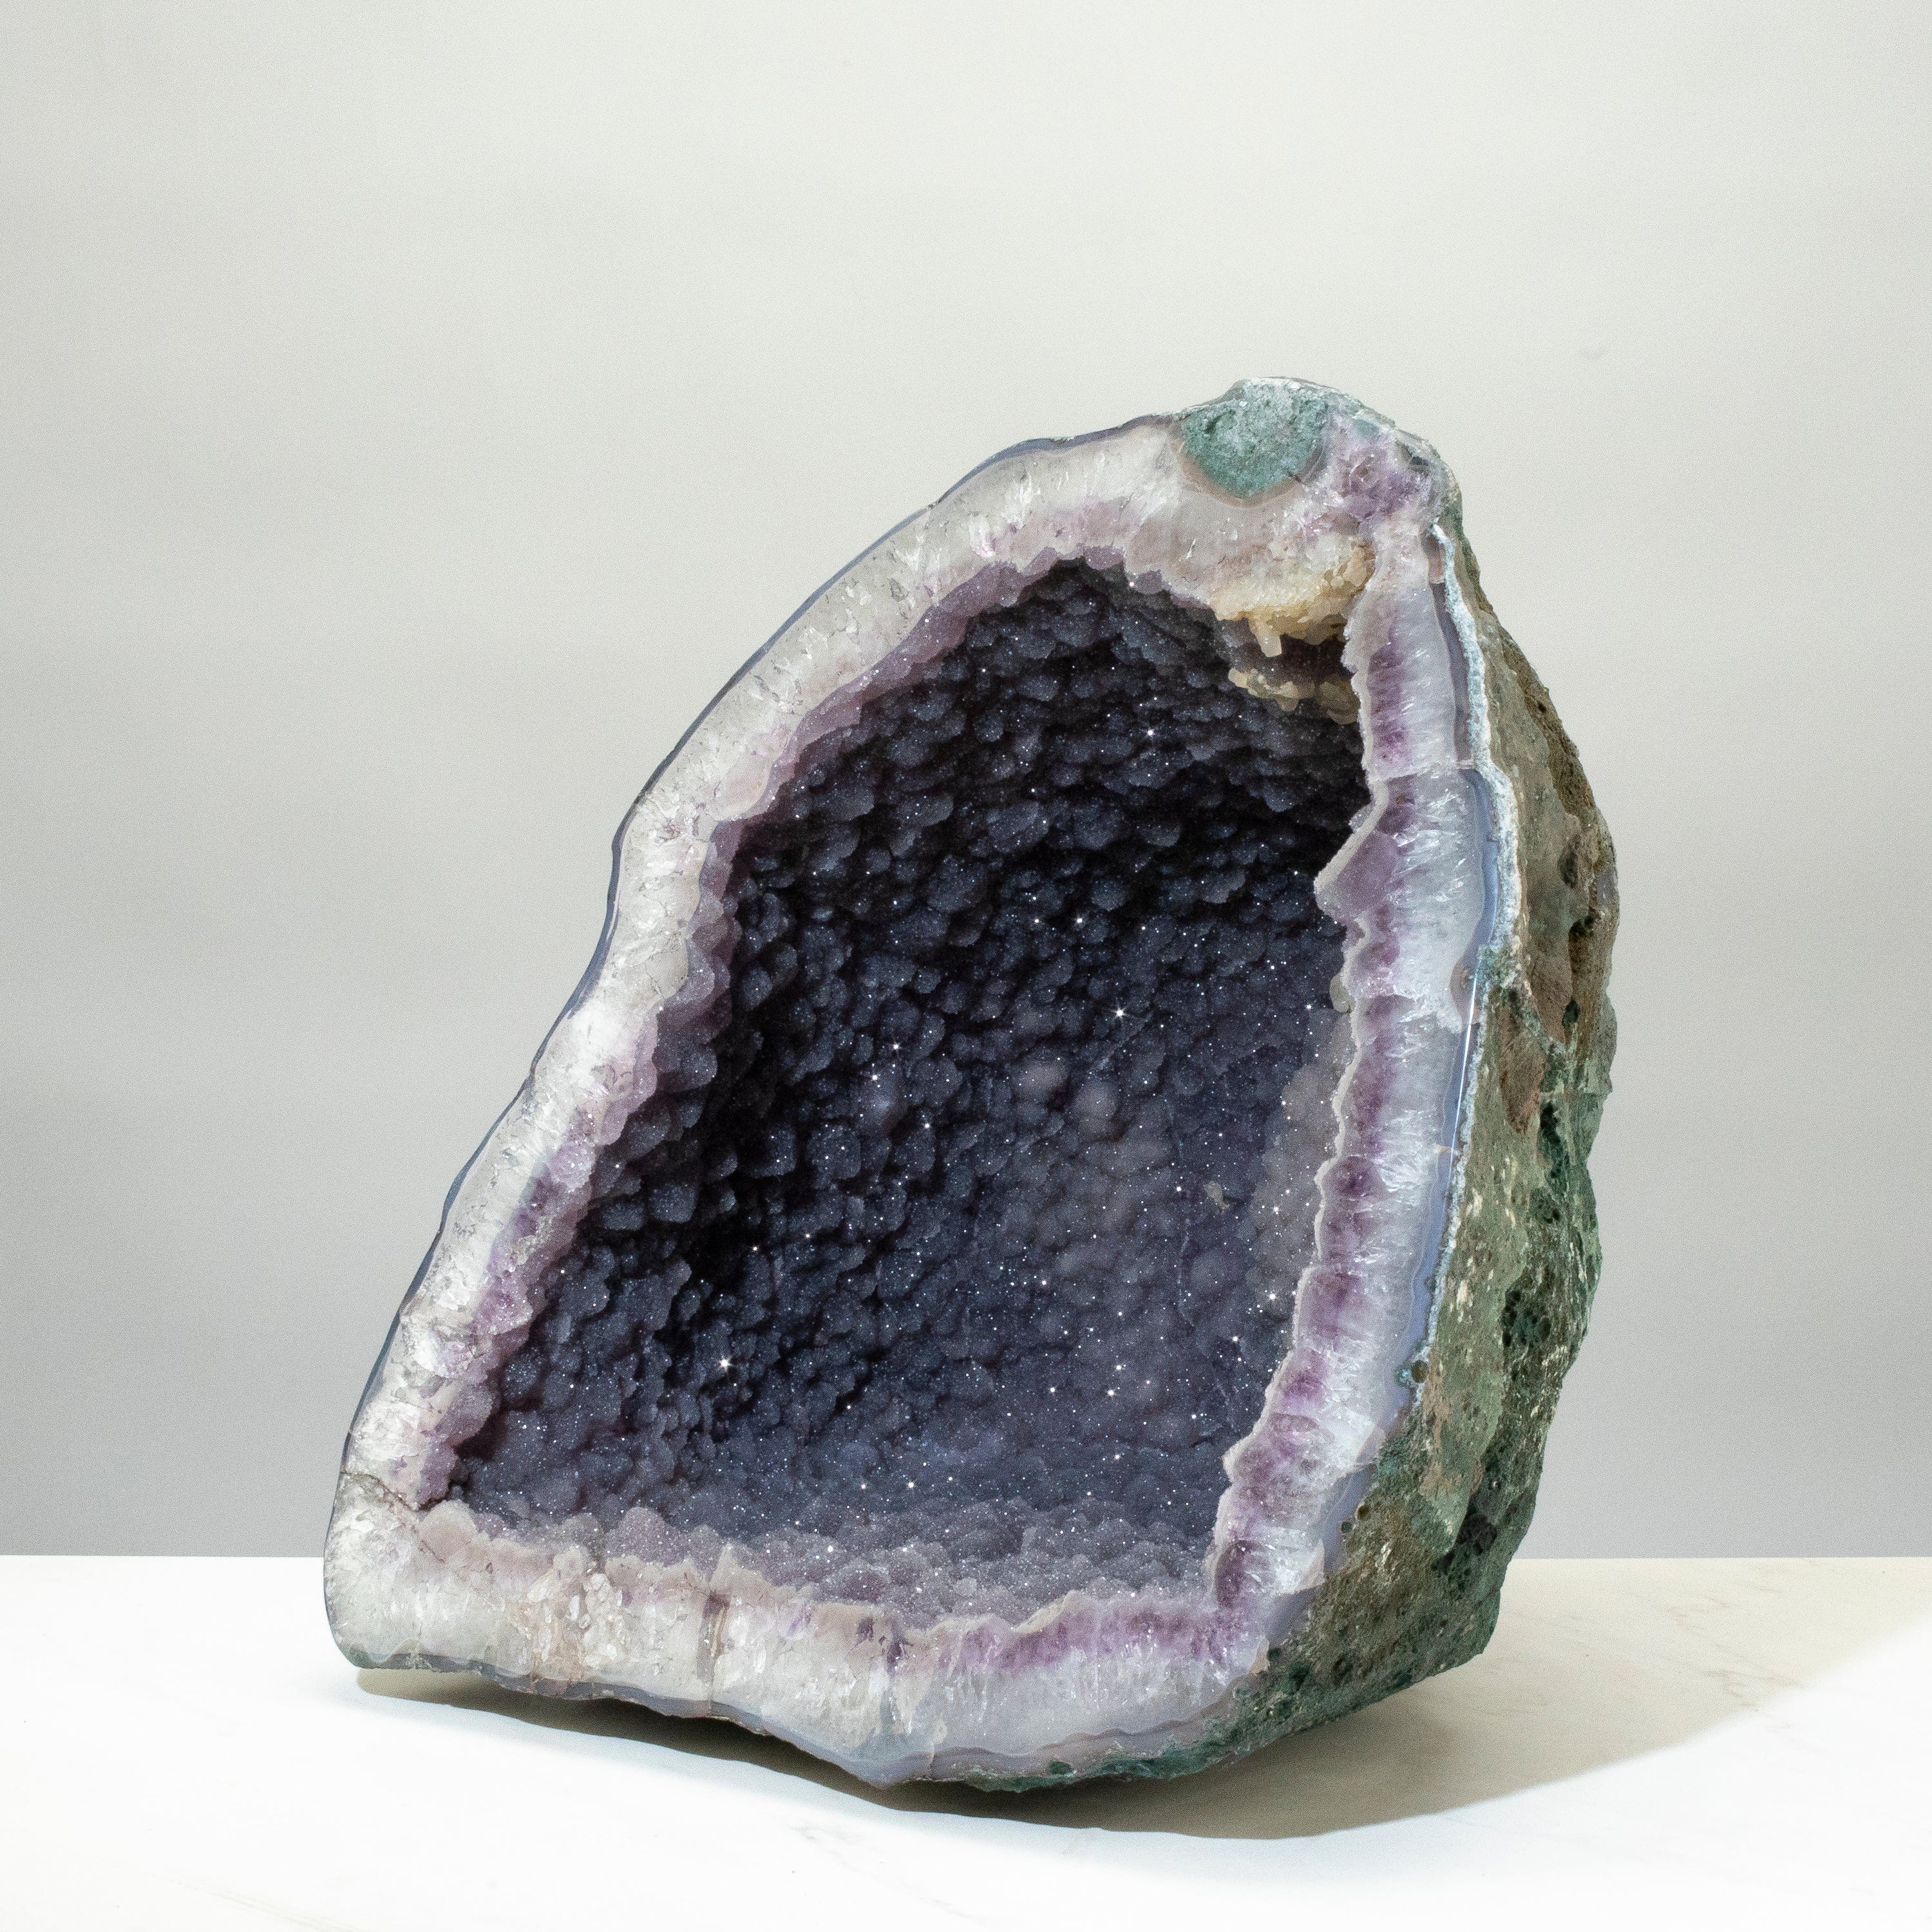 Kalifano Amethyst Amethyst Geode (with Micro Crystals) - 14" / 51lbs BAG6400.005